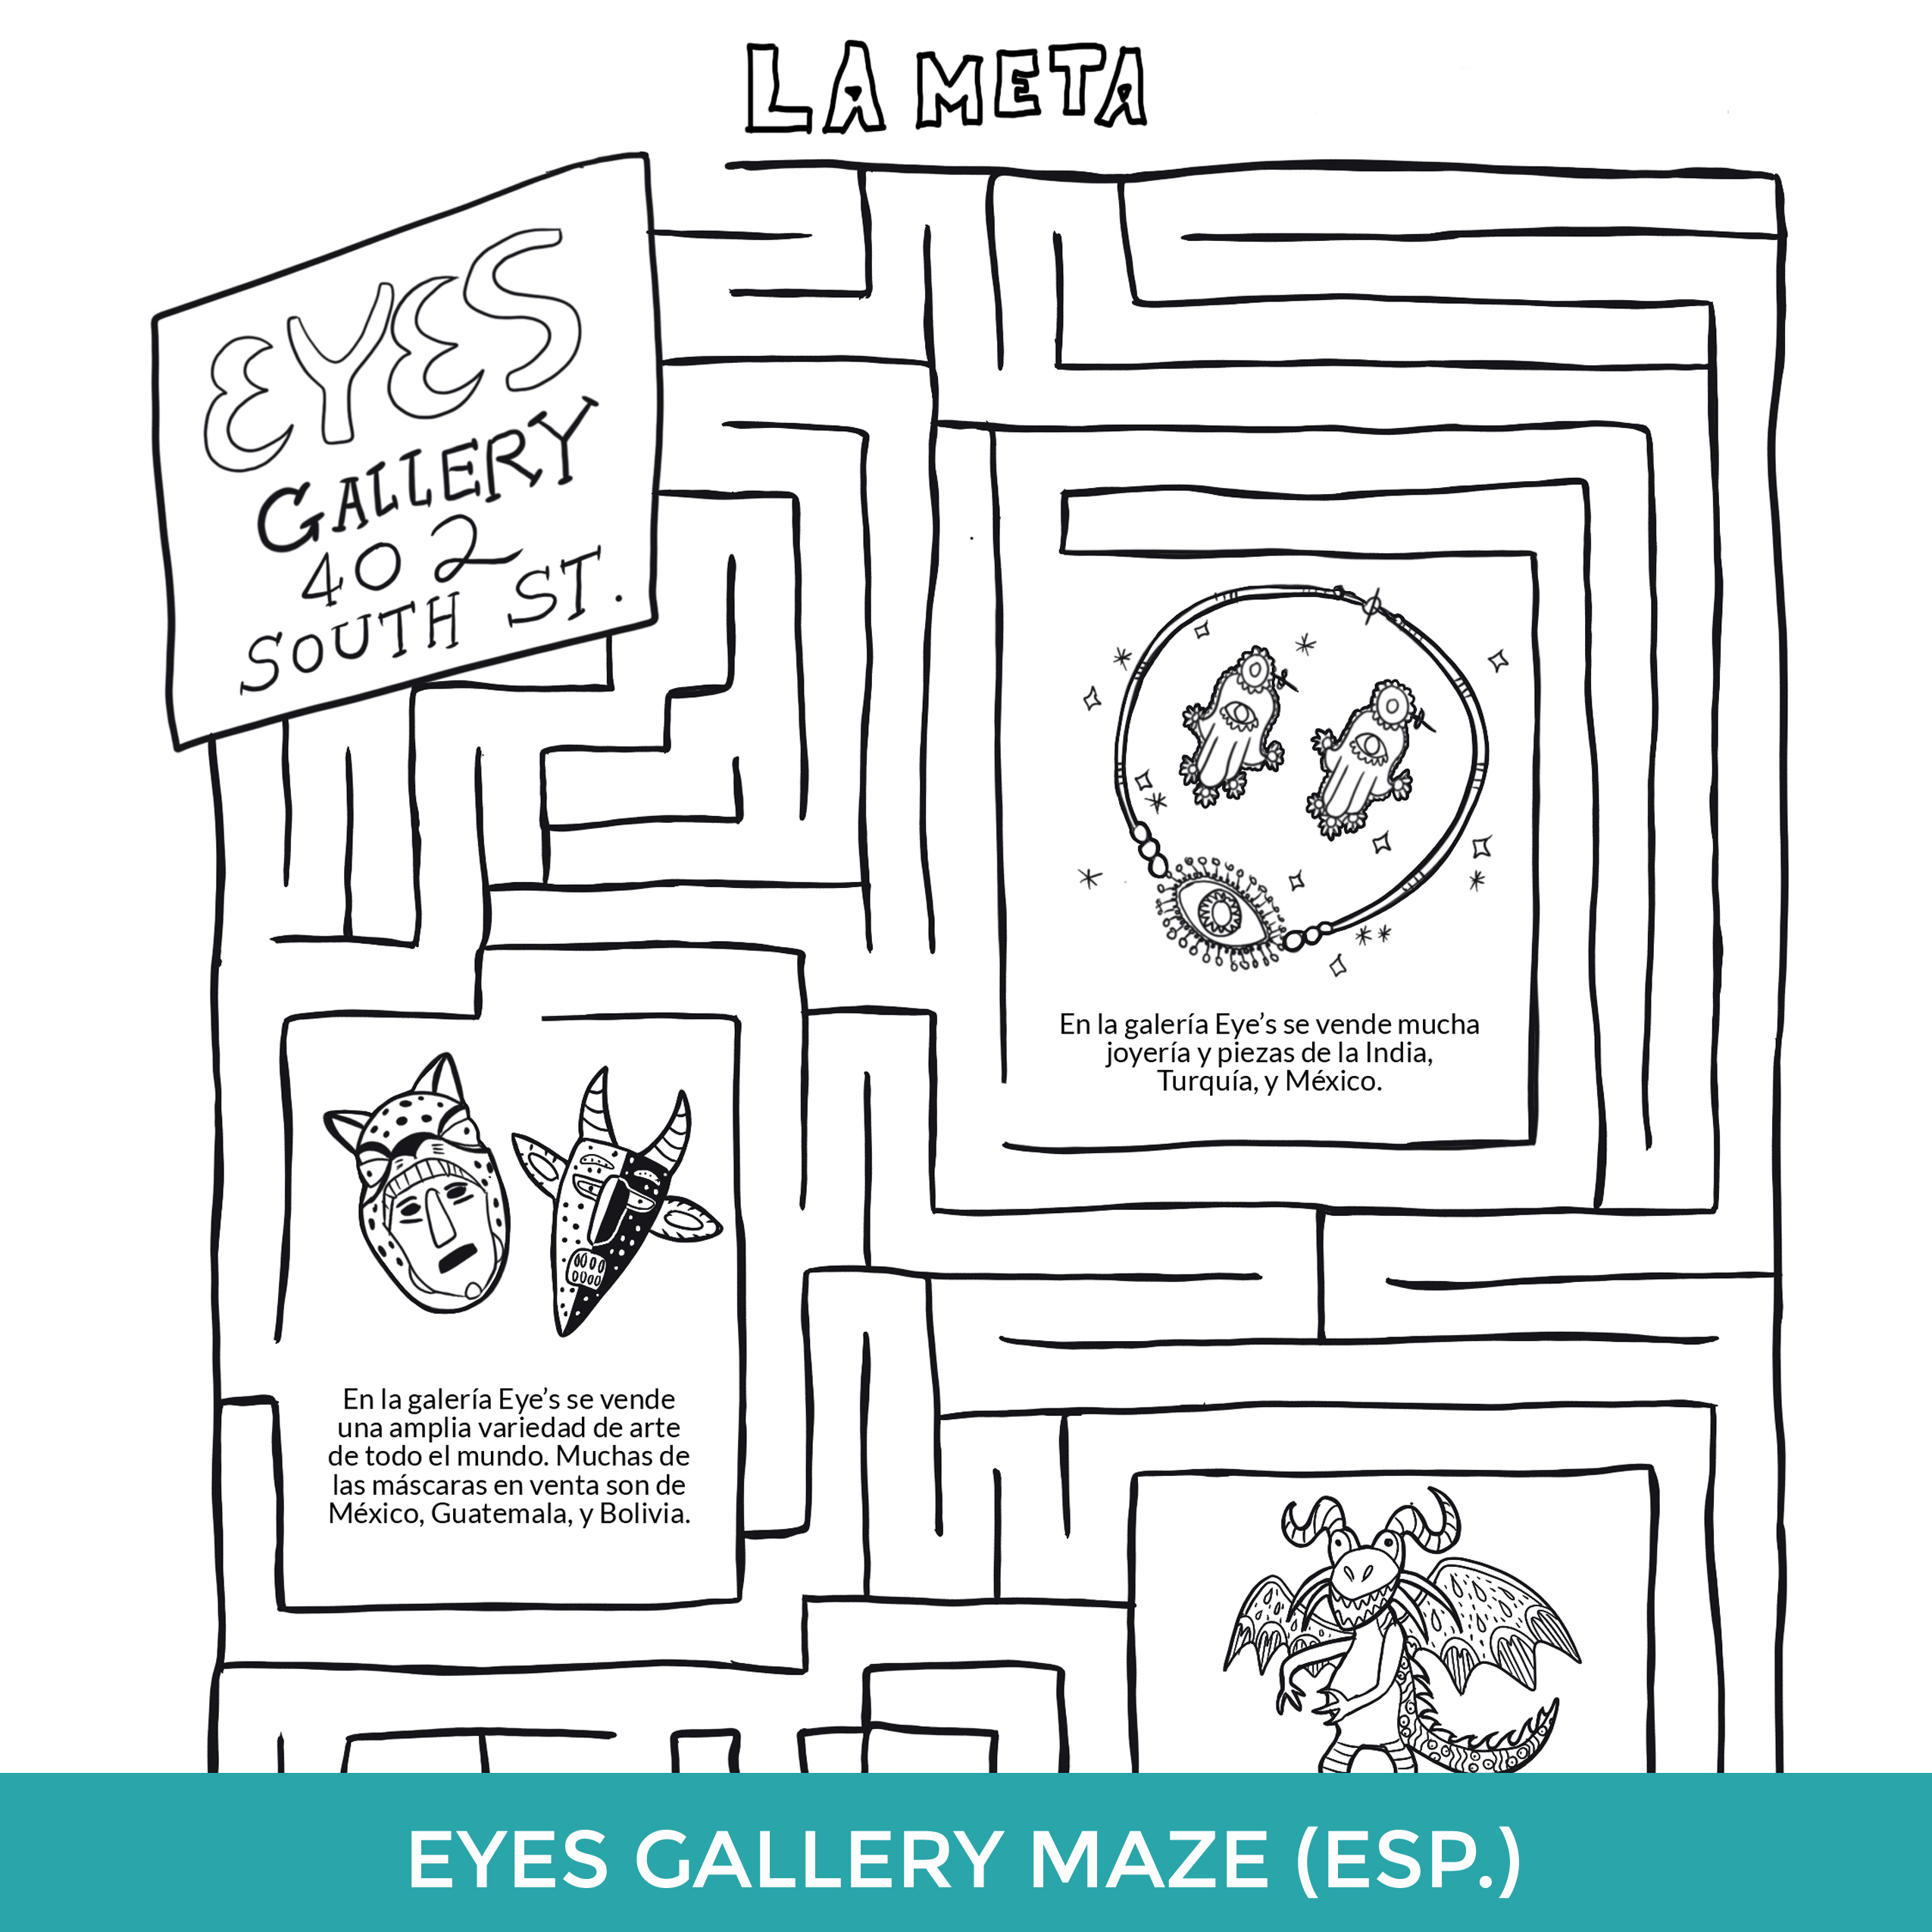 Line drawing showing a maze with small images of folk art inside it, including masks, jewelry, and an alebrije. At the top it reads "Eyes Gallery 402 South St."